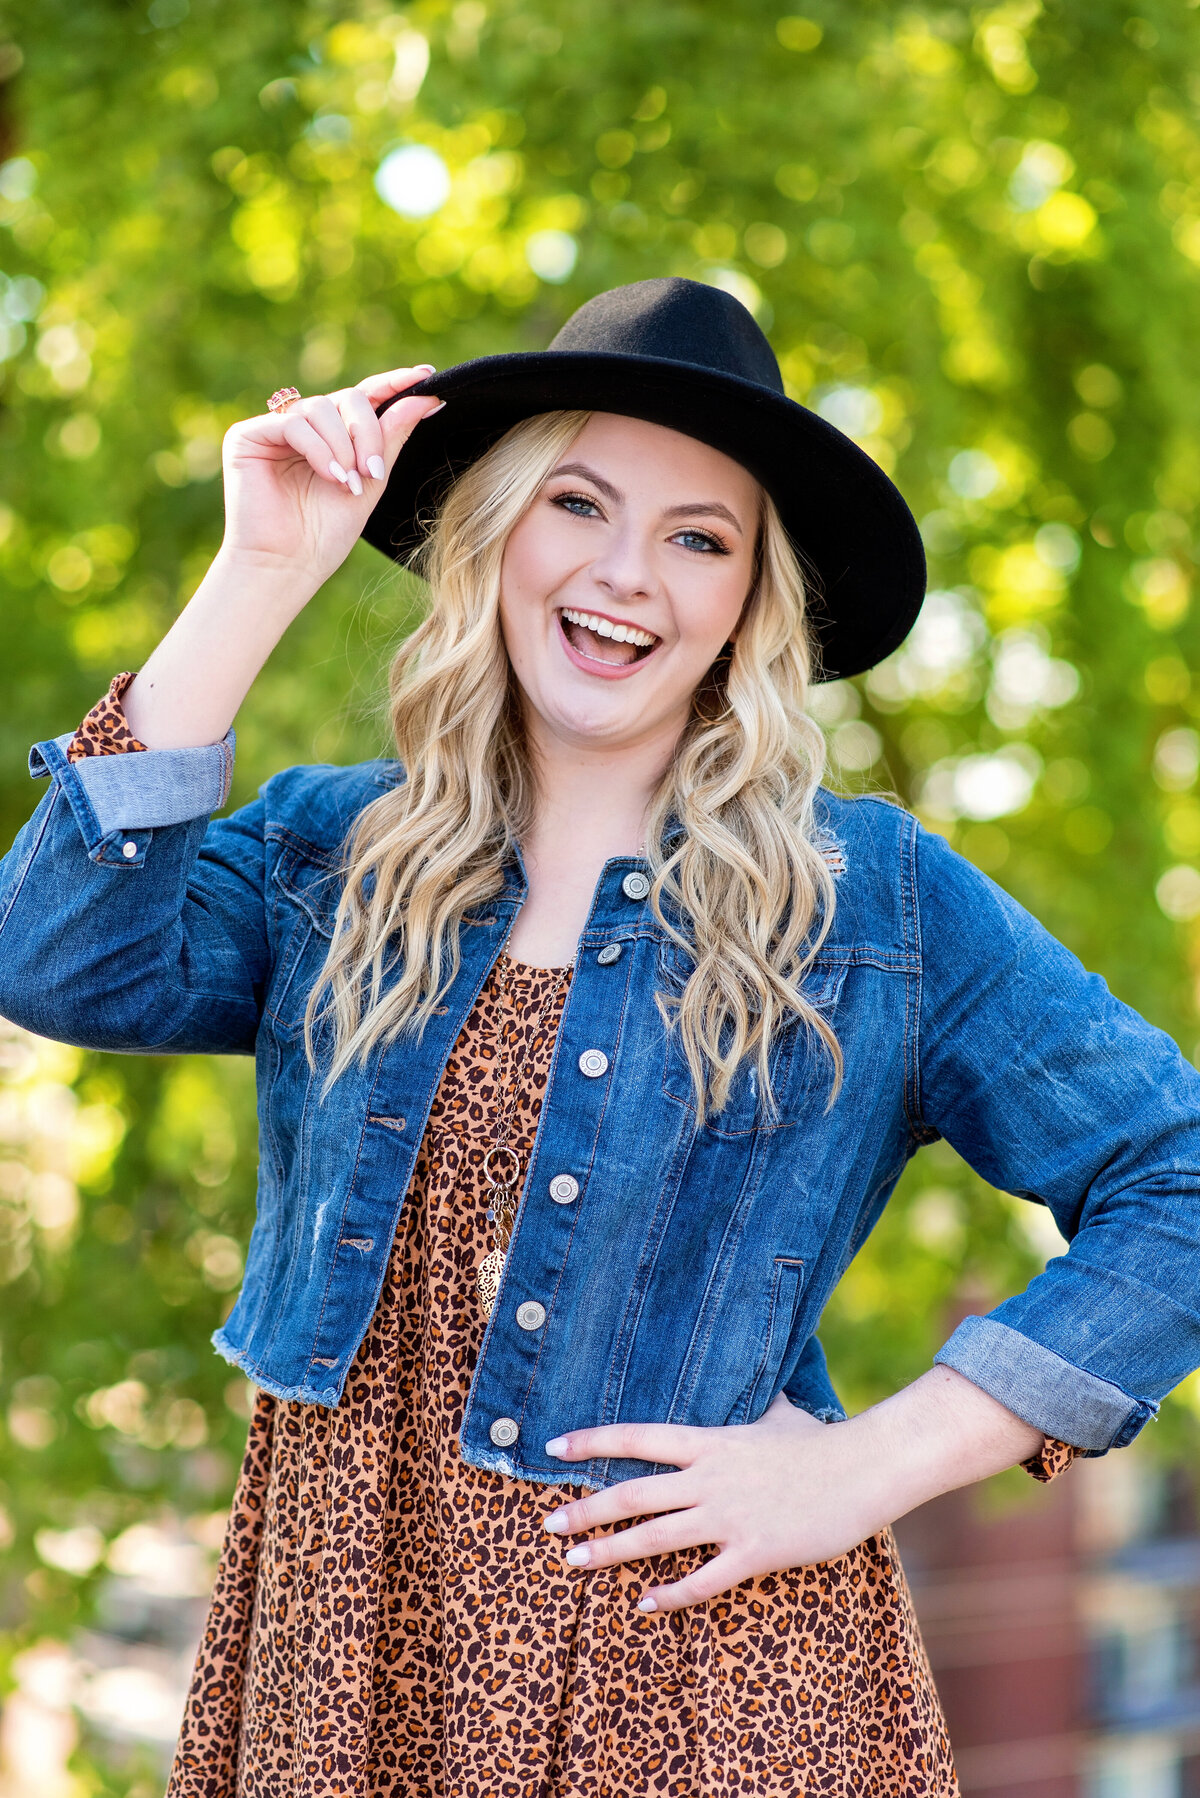 Midlothian high school senior girl wearing animal print dress and denim dress laughs during her portrait session at Libby Hilly Park.